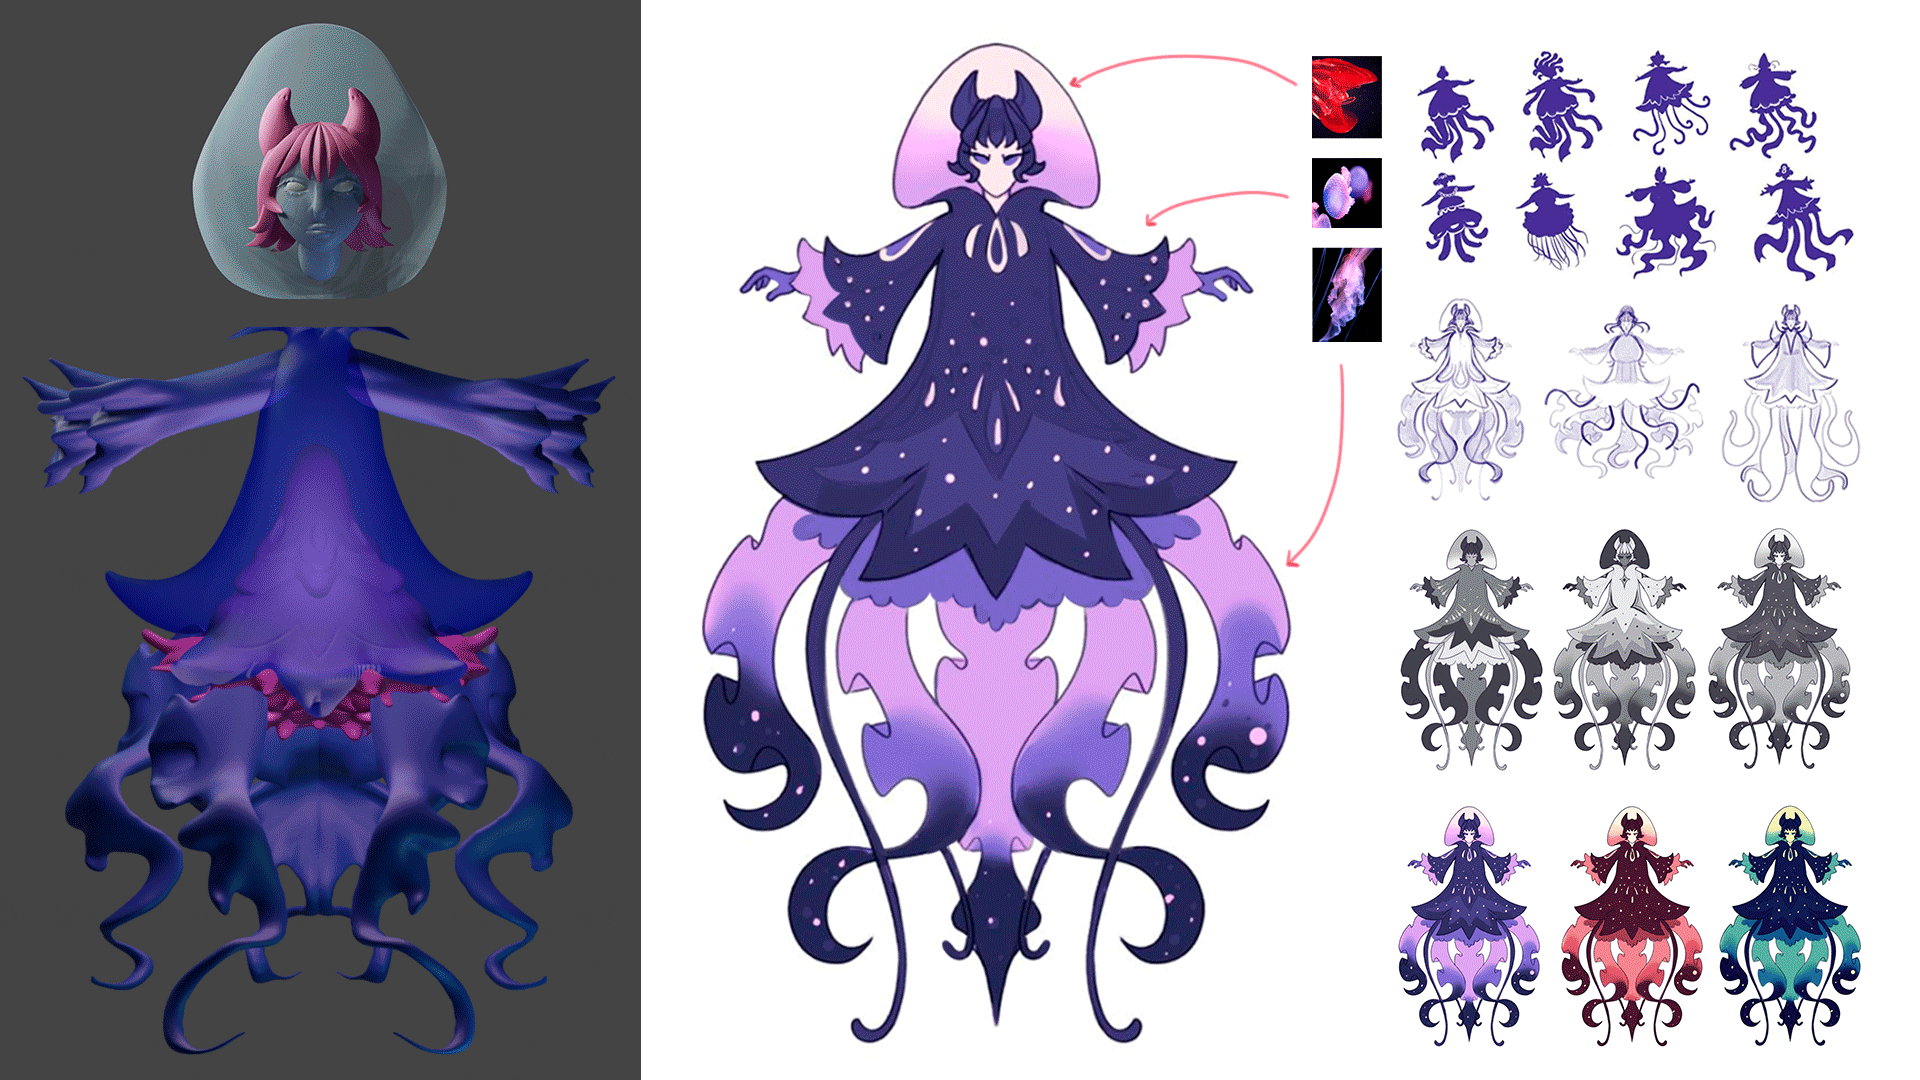 Jellyfish sea-witch character with a spinning 3D model, next to sketches and progress work of the character.